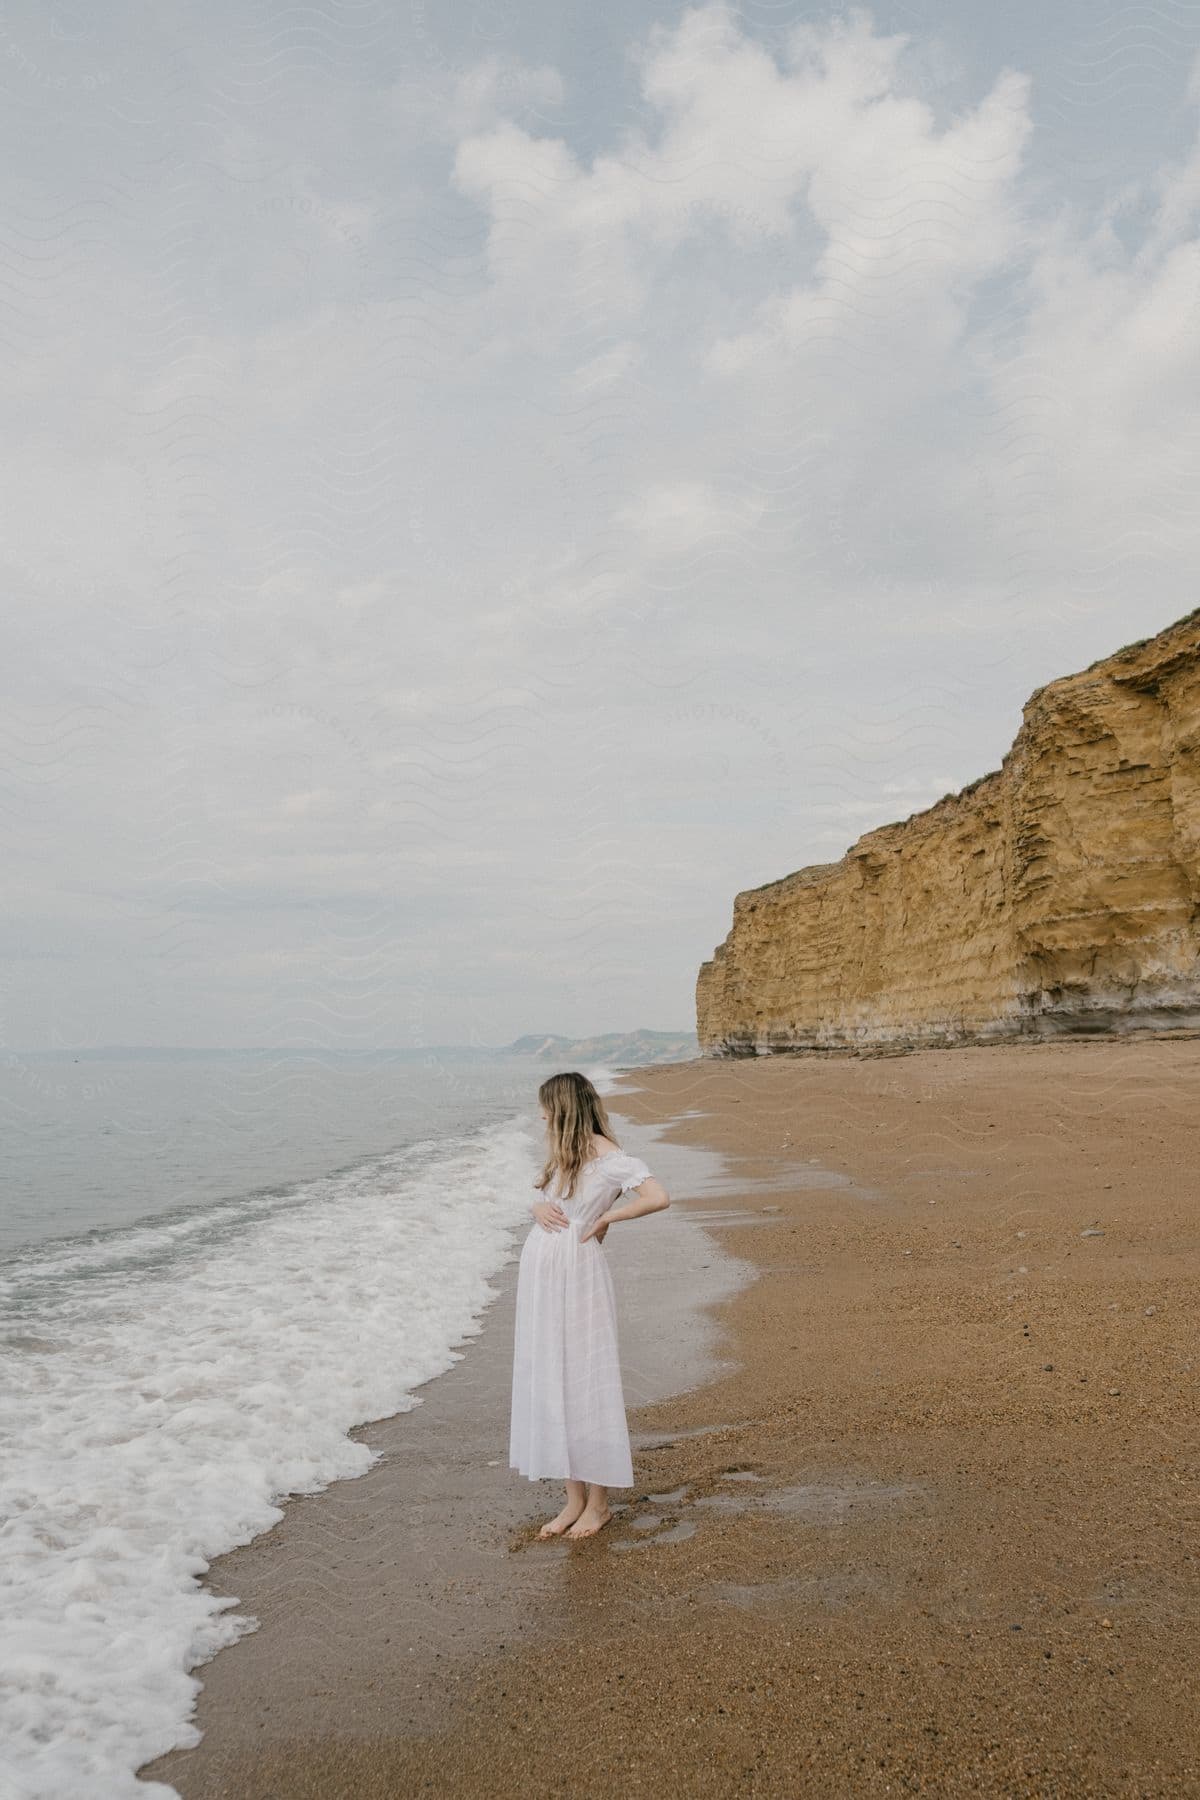 A blonde woman in a white dress stands on a beach with cliffs behind her, waves crashing on shore under cloudy skies.